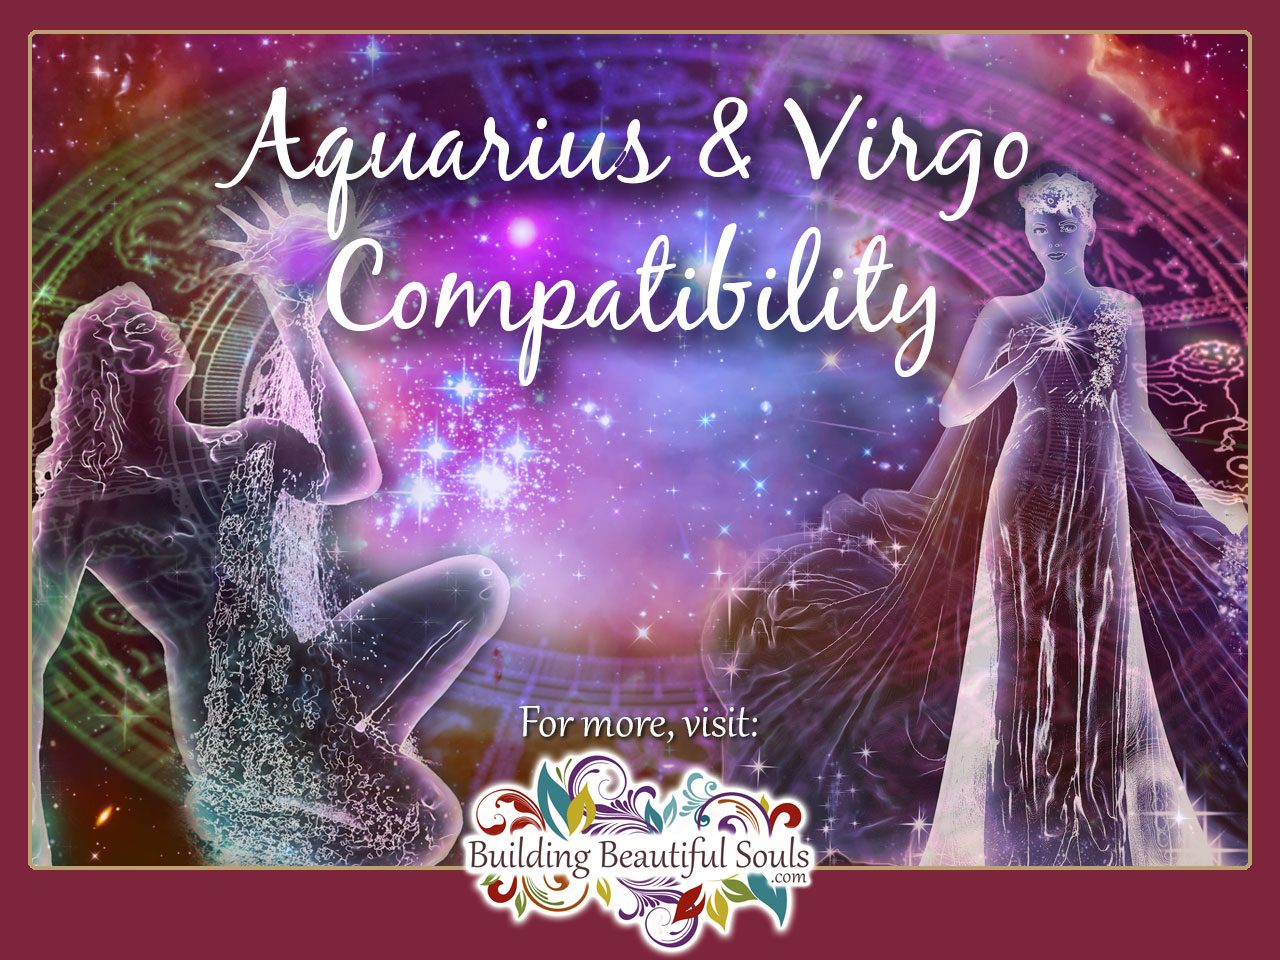 What Is The Meaning Of Virgo Aquarius Friendship?